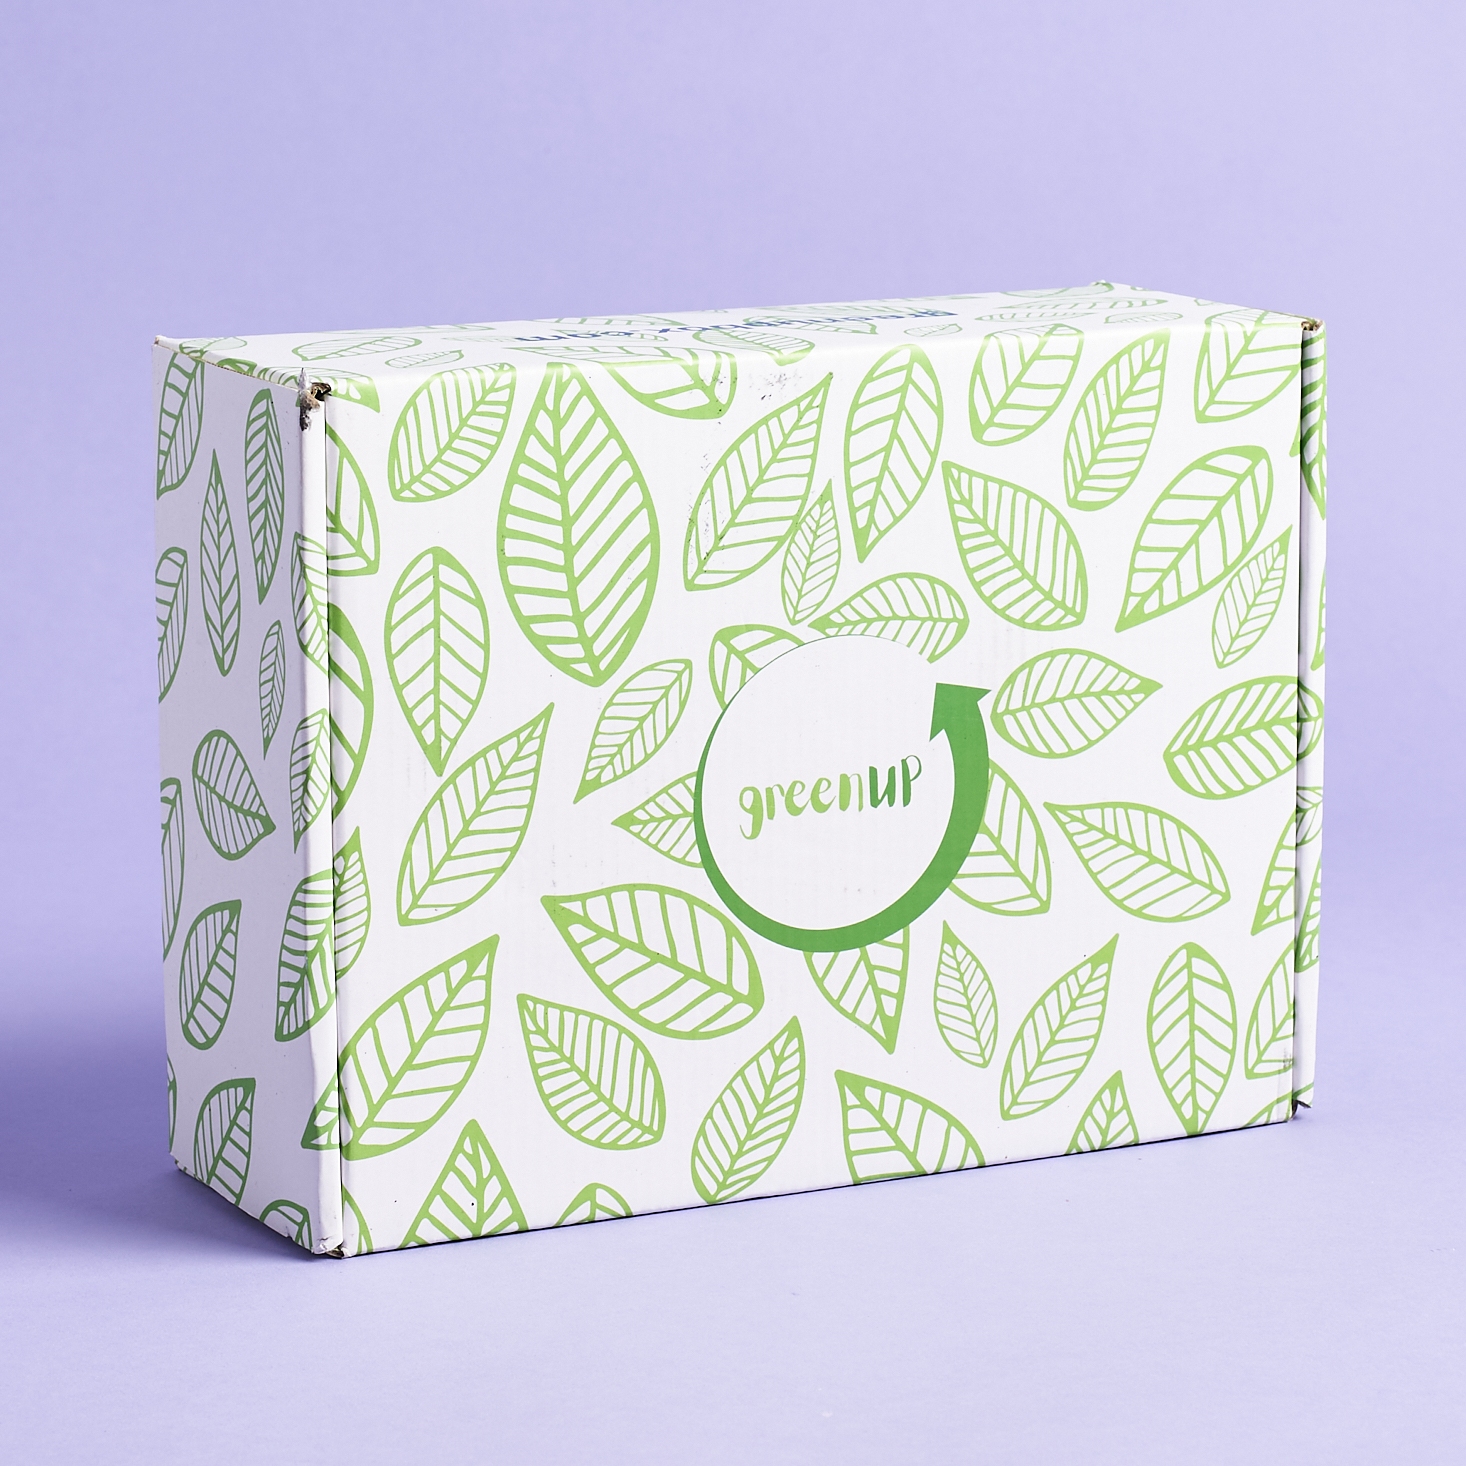 greenUP Box Subscription Review – October 2020